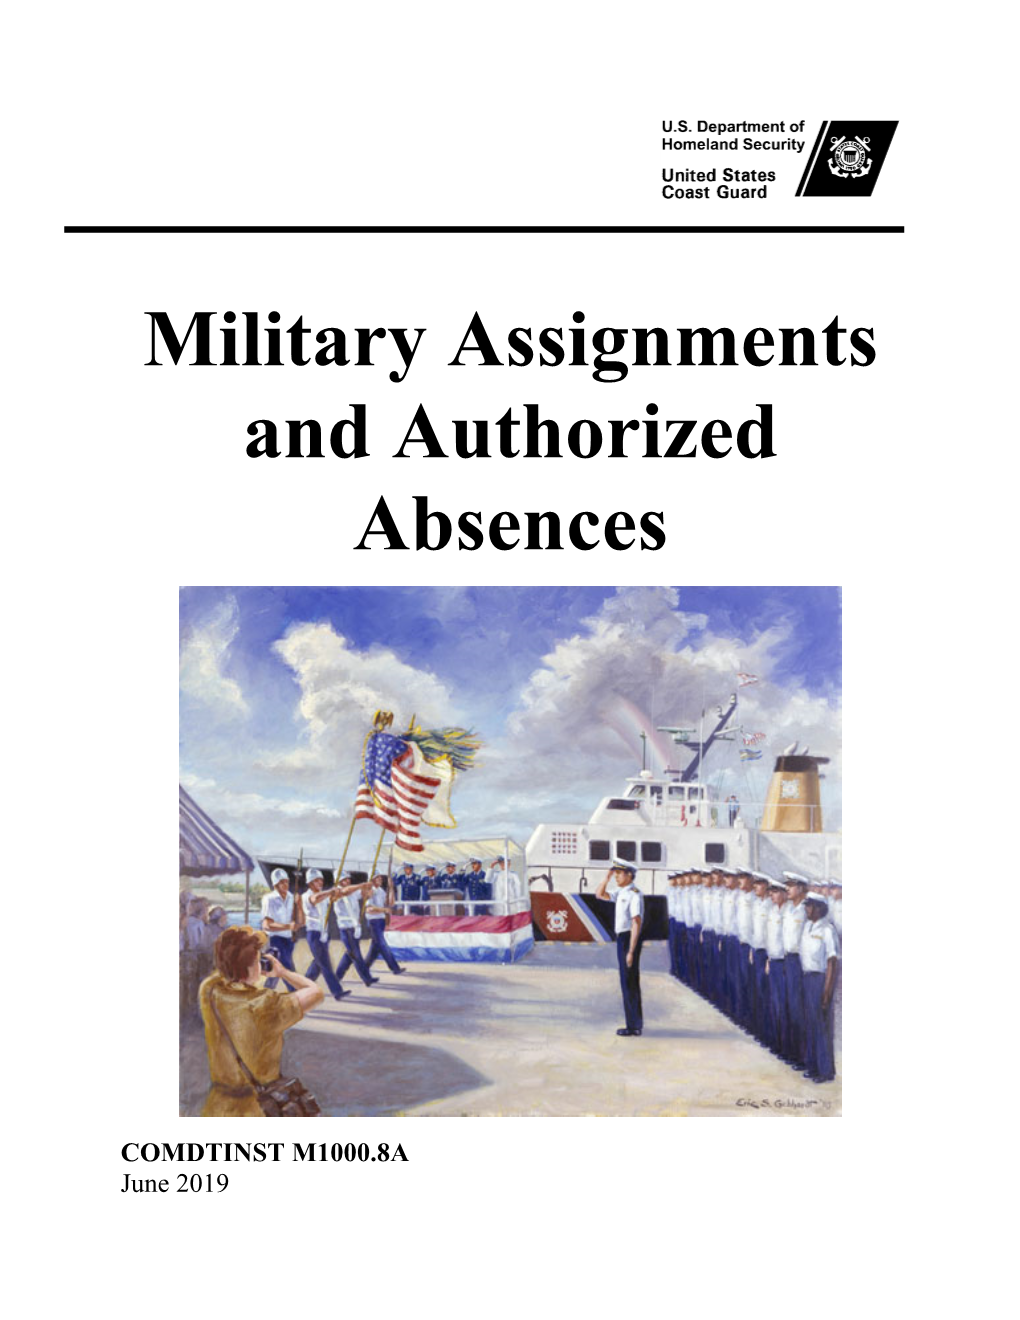 Military Assignments and Authorized Absences, Comdtinst M1000.8A